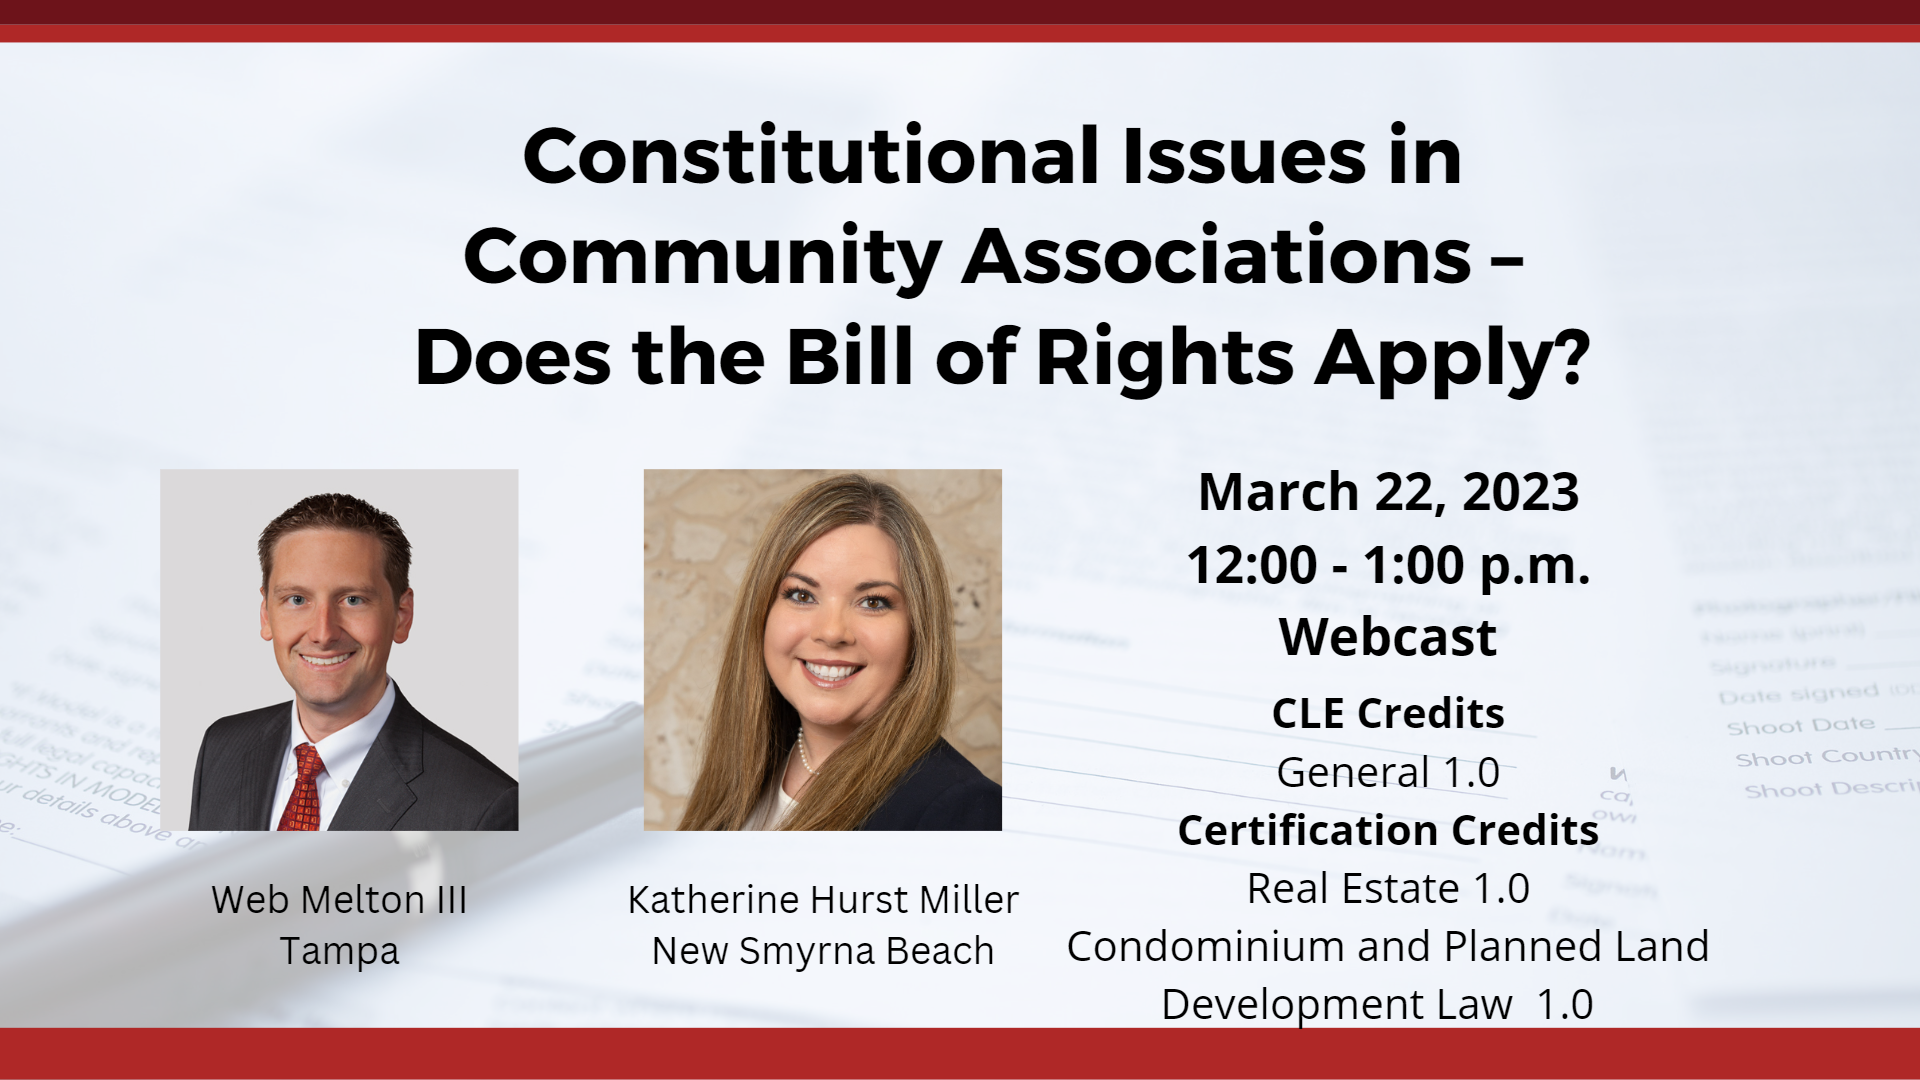 Constitutional Issues in Community Associations – Does the Bill of Rights Apply?